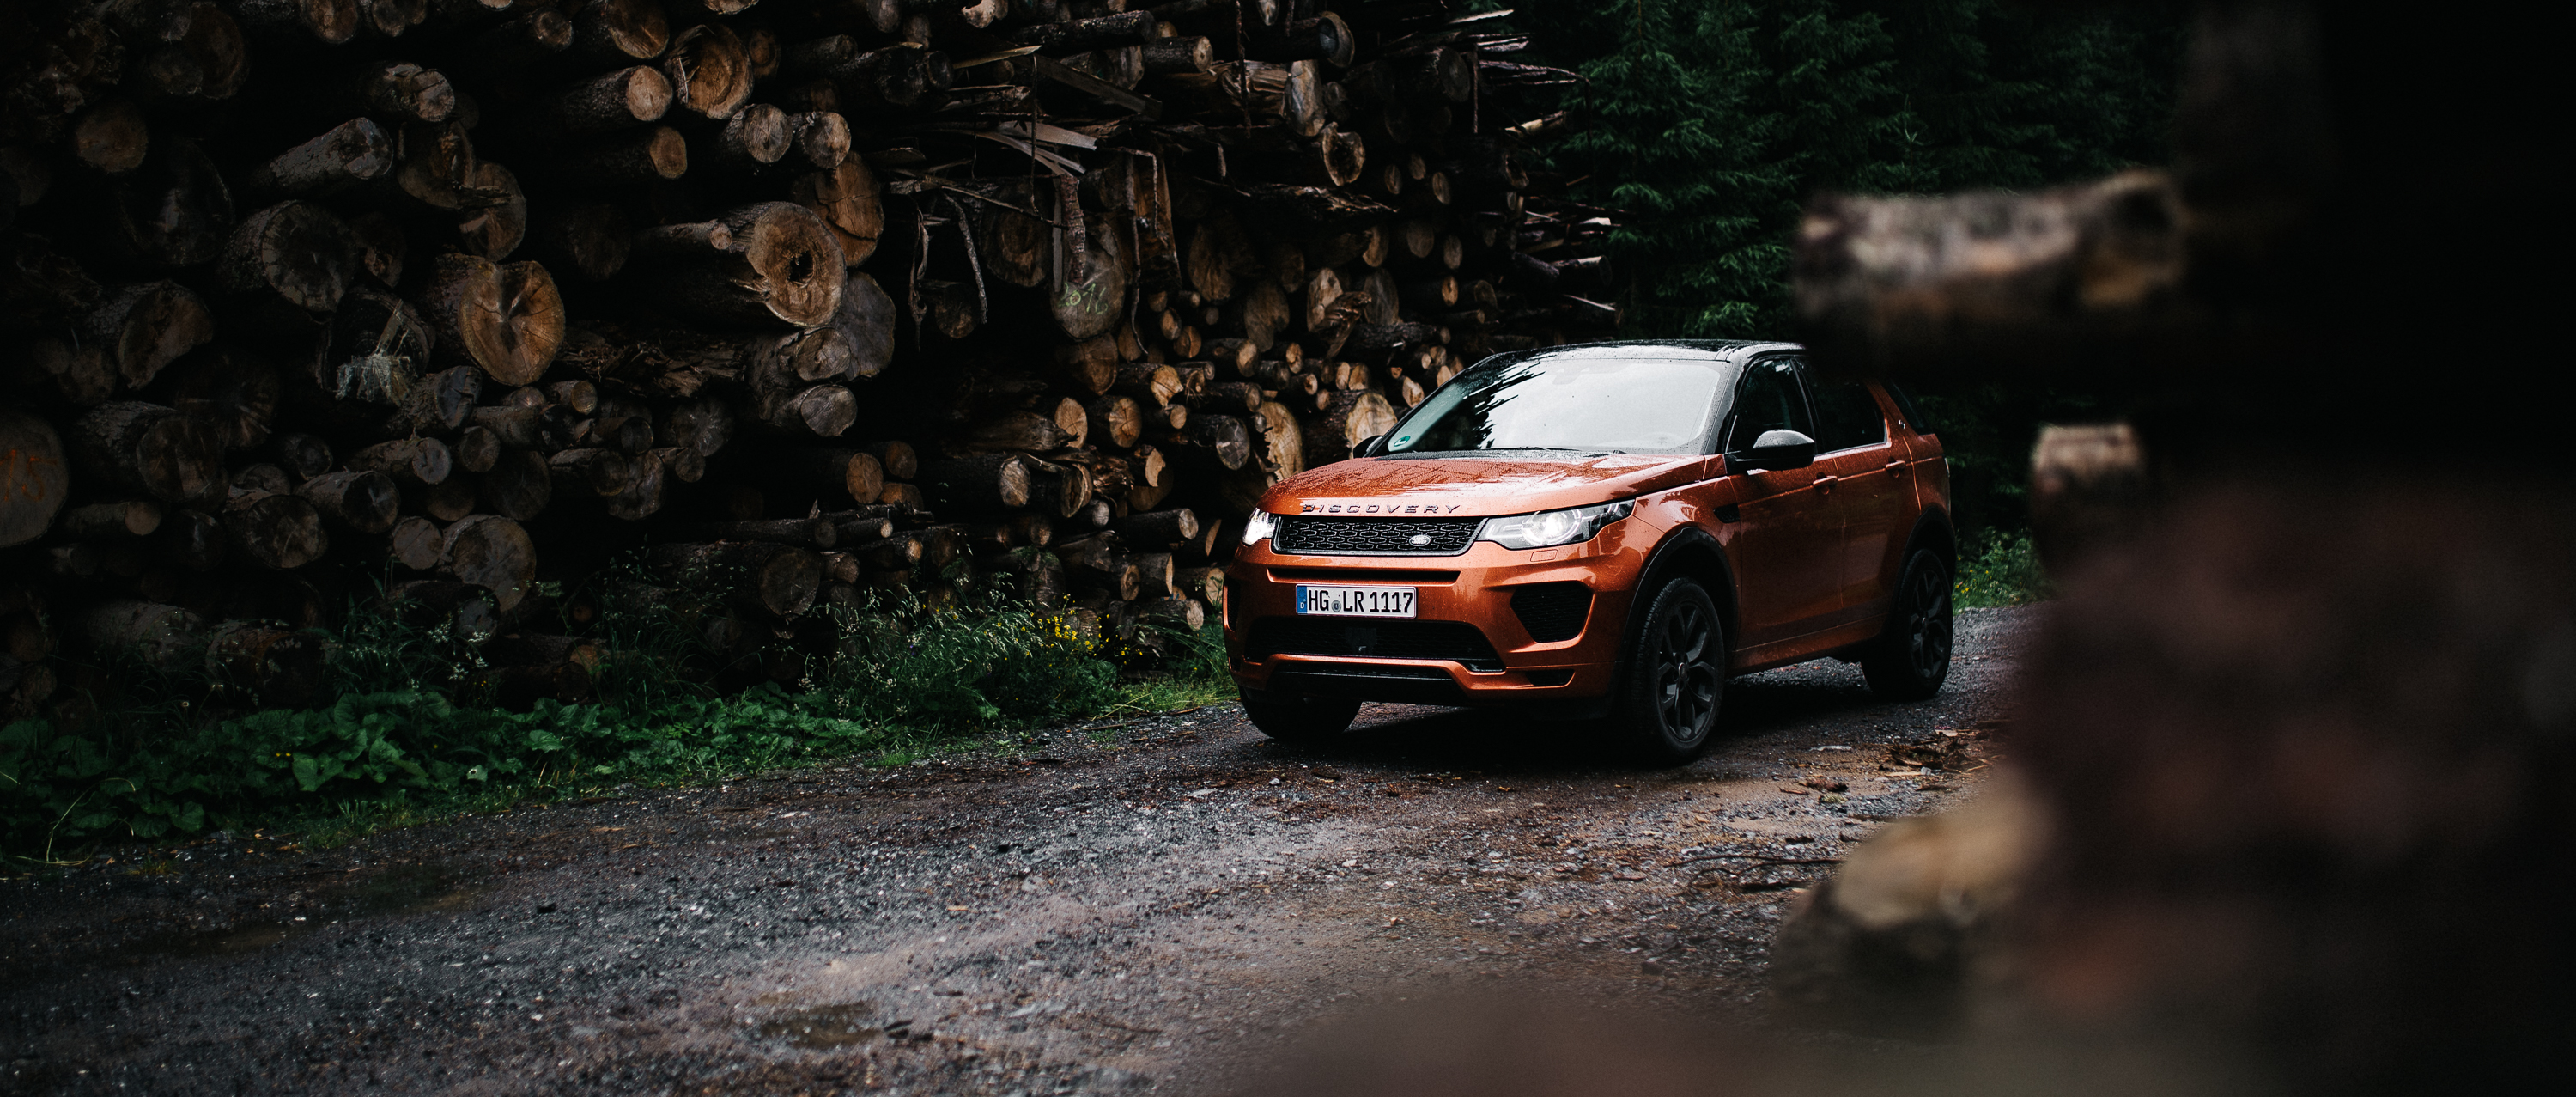 General 3000x1277 vehicle Land Rover car landscape forest tree bark rain road trees frontal view Land Rover Discovery SUV British cars